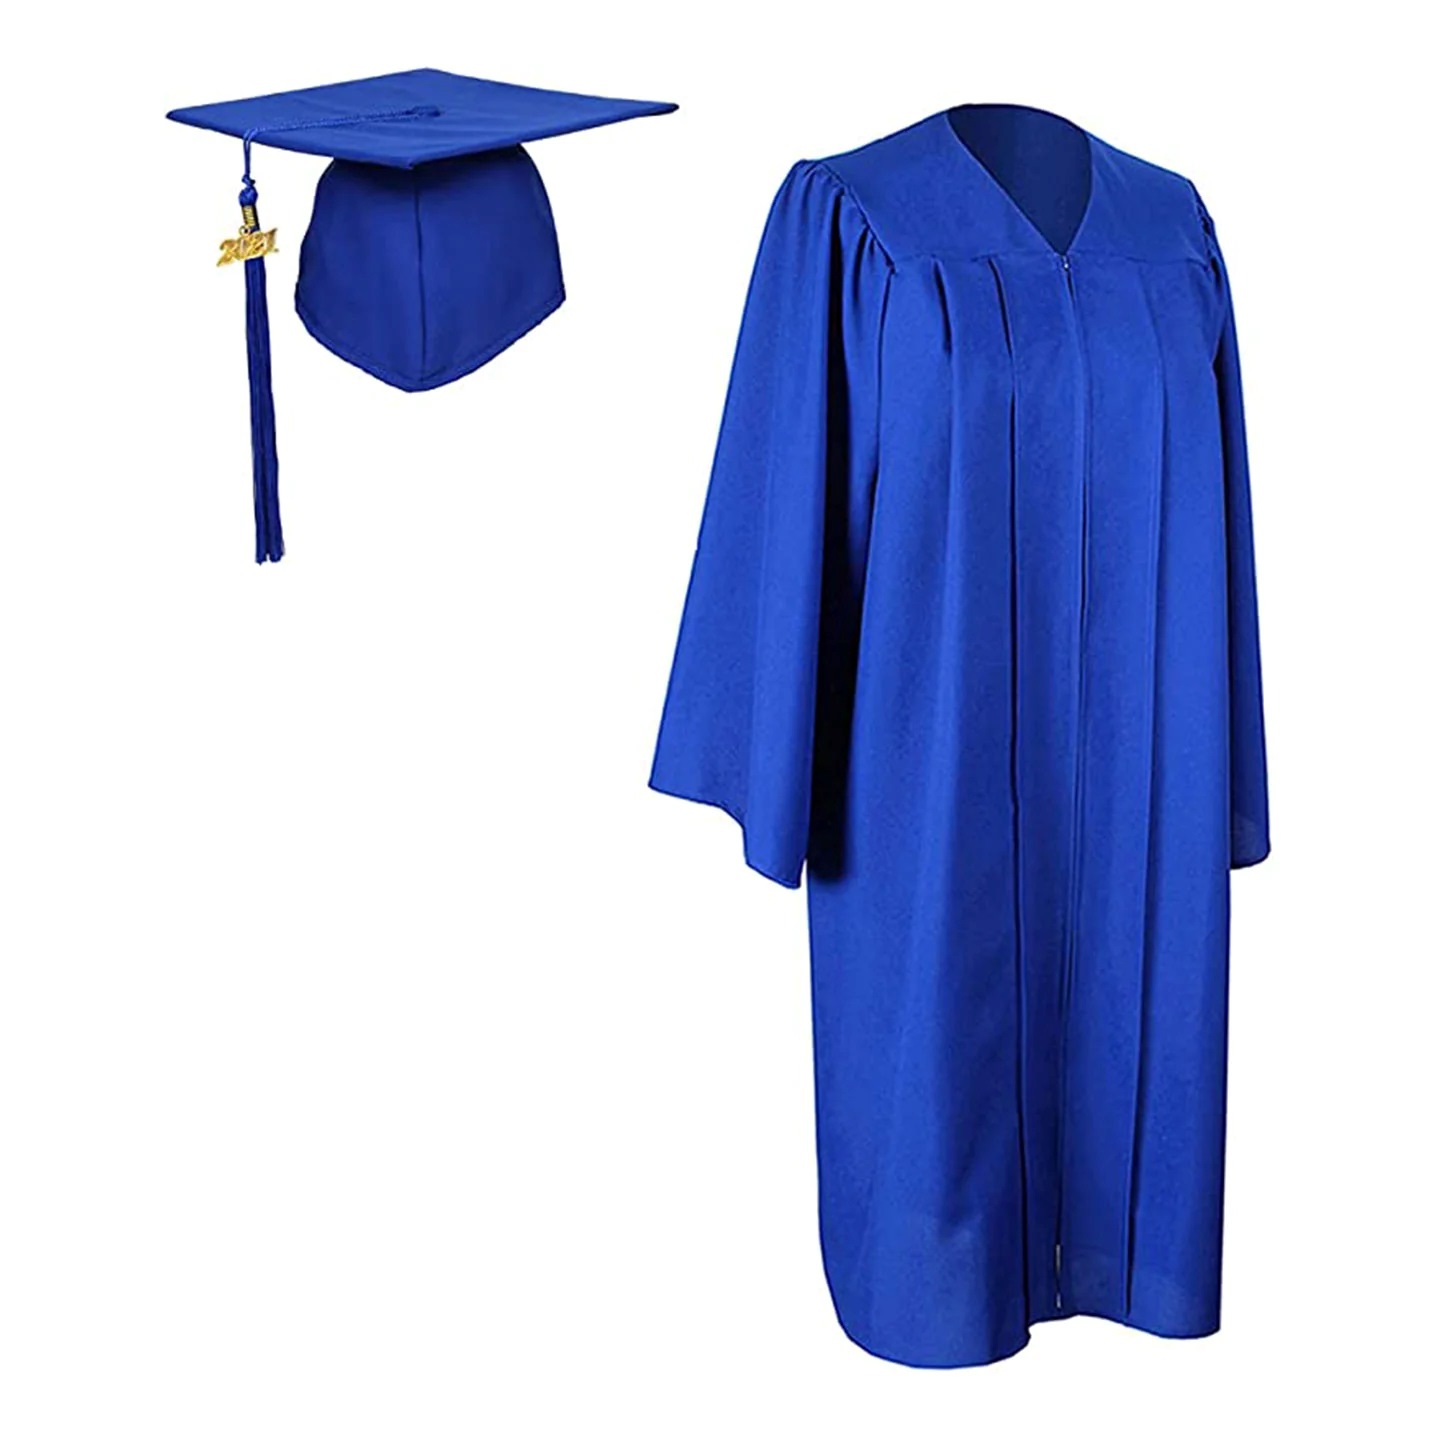 How To Store Graduation Cap And Gown